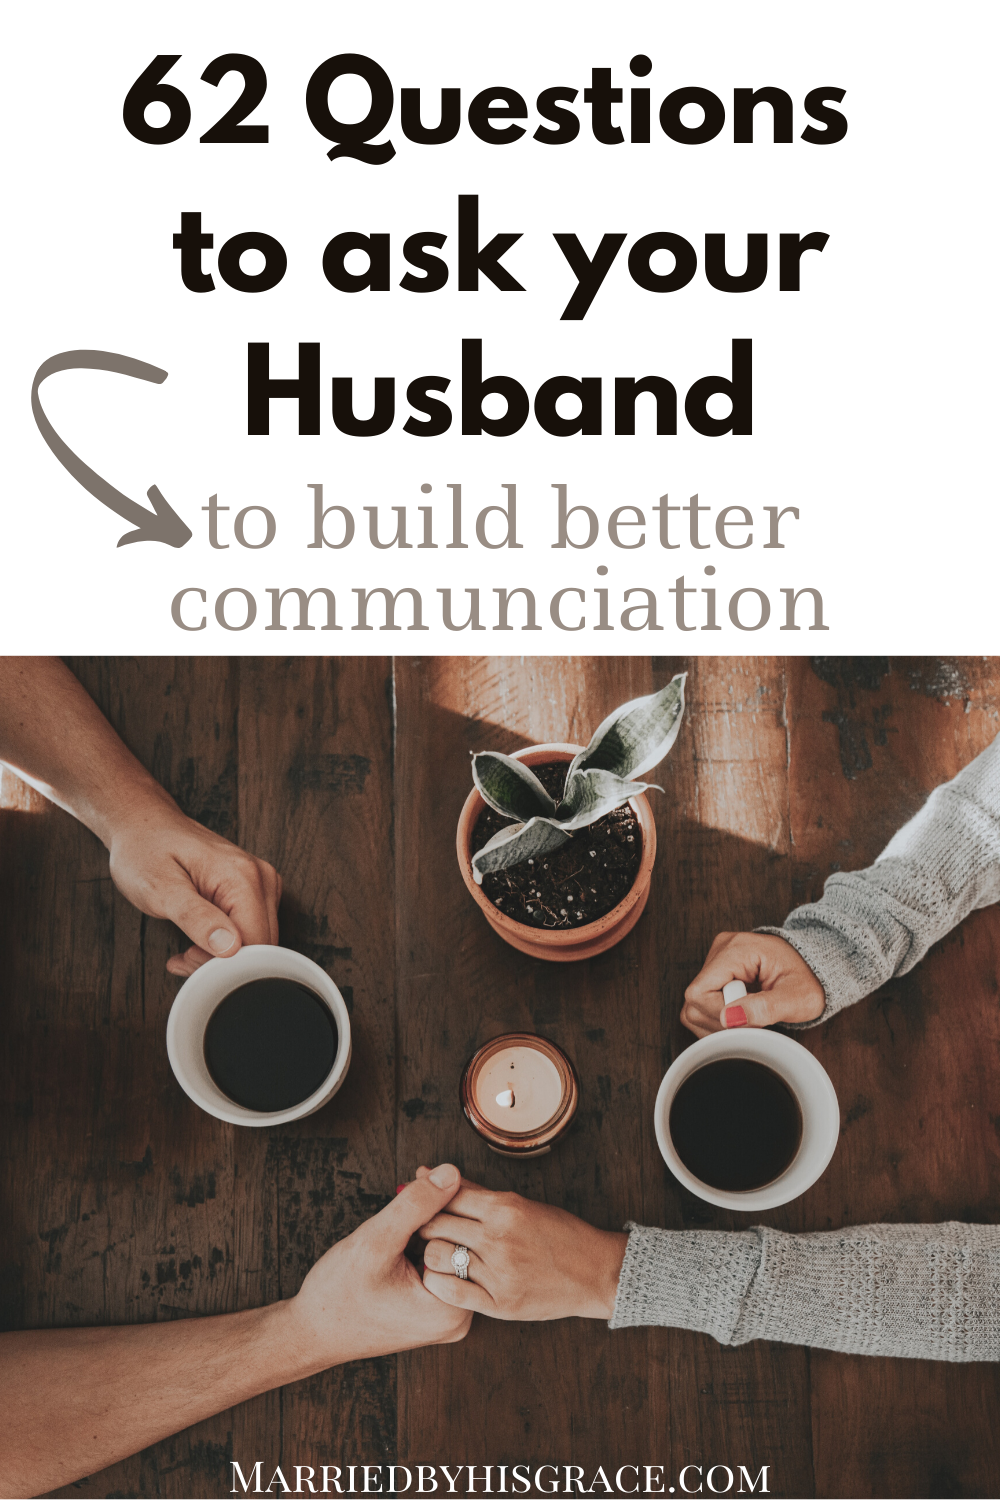 62 Questions to ask your Husband to build better communication in your marriage